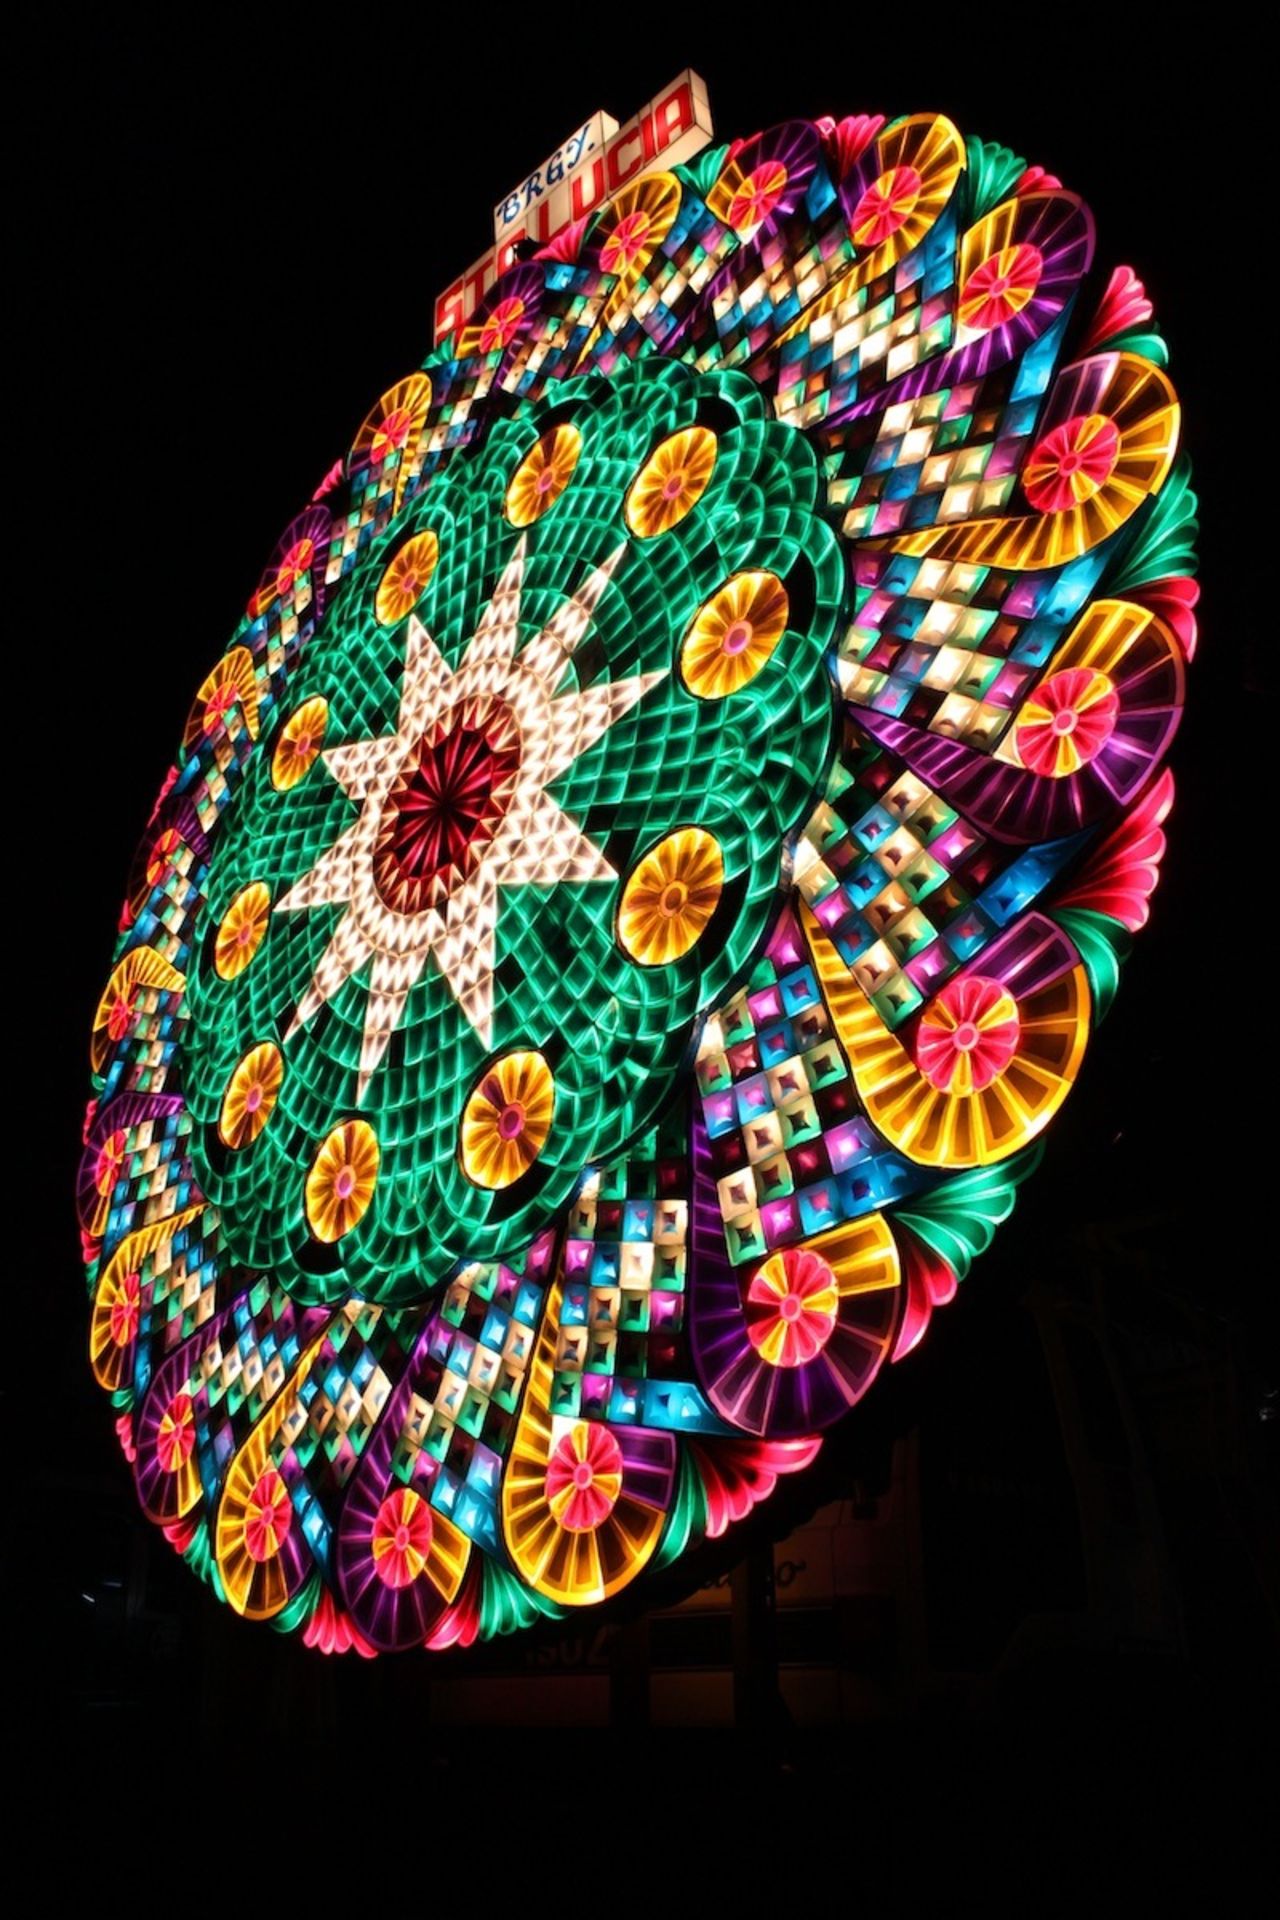 San Fernando is the birthplace of the Philippines' giant Christmas lantern and home to the annual Ligligan Parul (Giant Lantern Festival). Each lantern stands about 20 feet high and features 5,000 or so lights. 